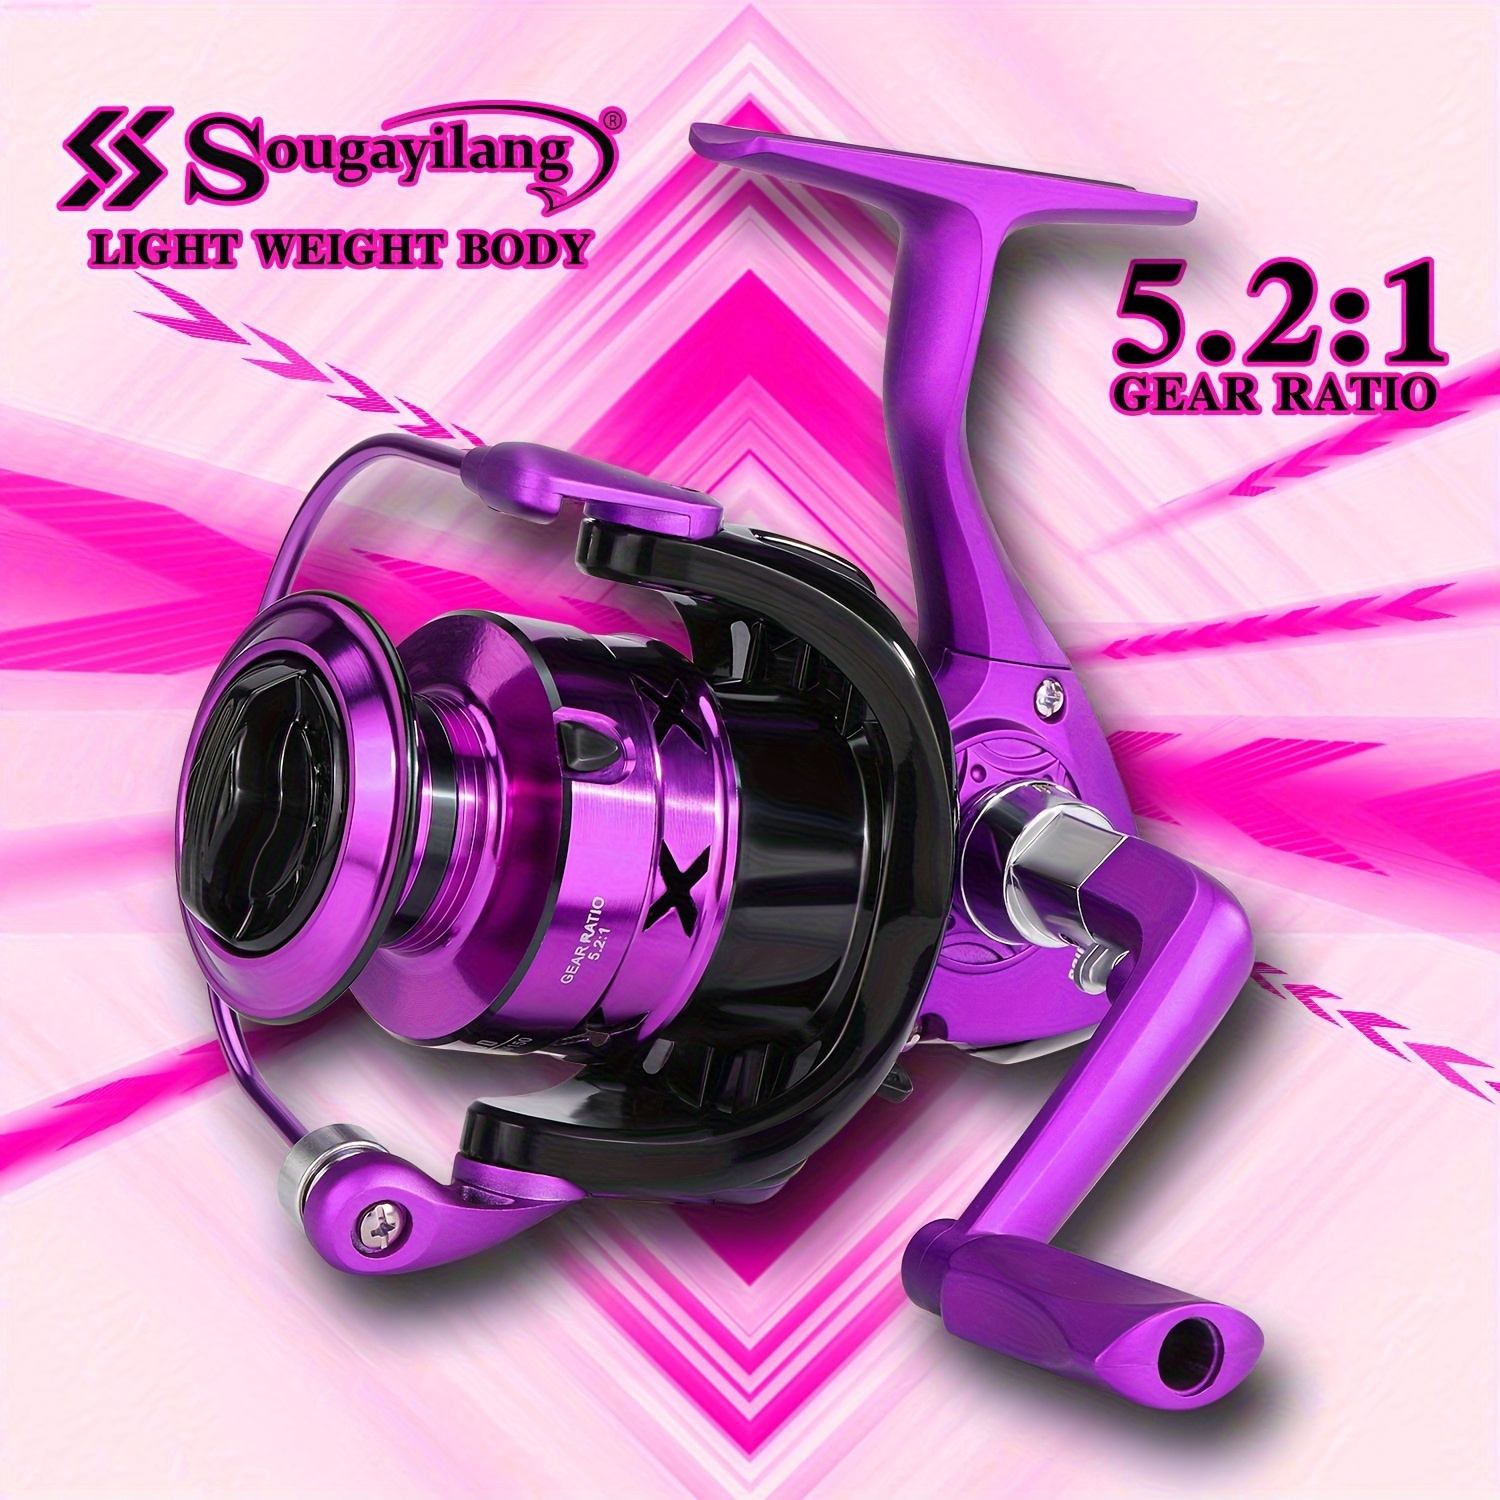 

Sougayilang 1pc 1000-7000 Series Spinning Reel, 5:2:1 High Gear Ratio, Super Light Cnc Aluminum Spool, Interchangeable Handle, Durable Metal Fishing Reel For Freshwater And Saltwater Fishing